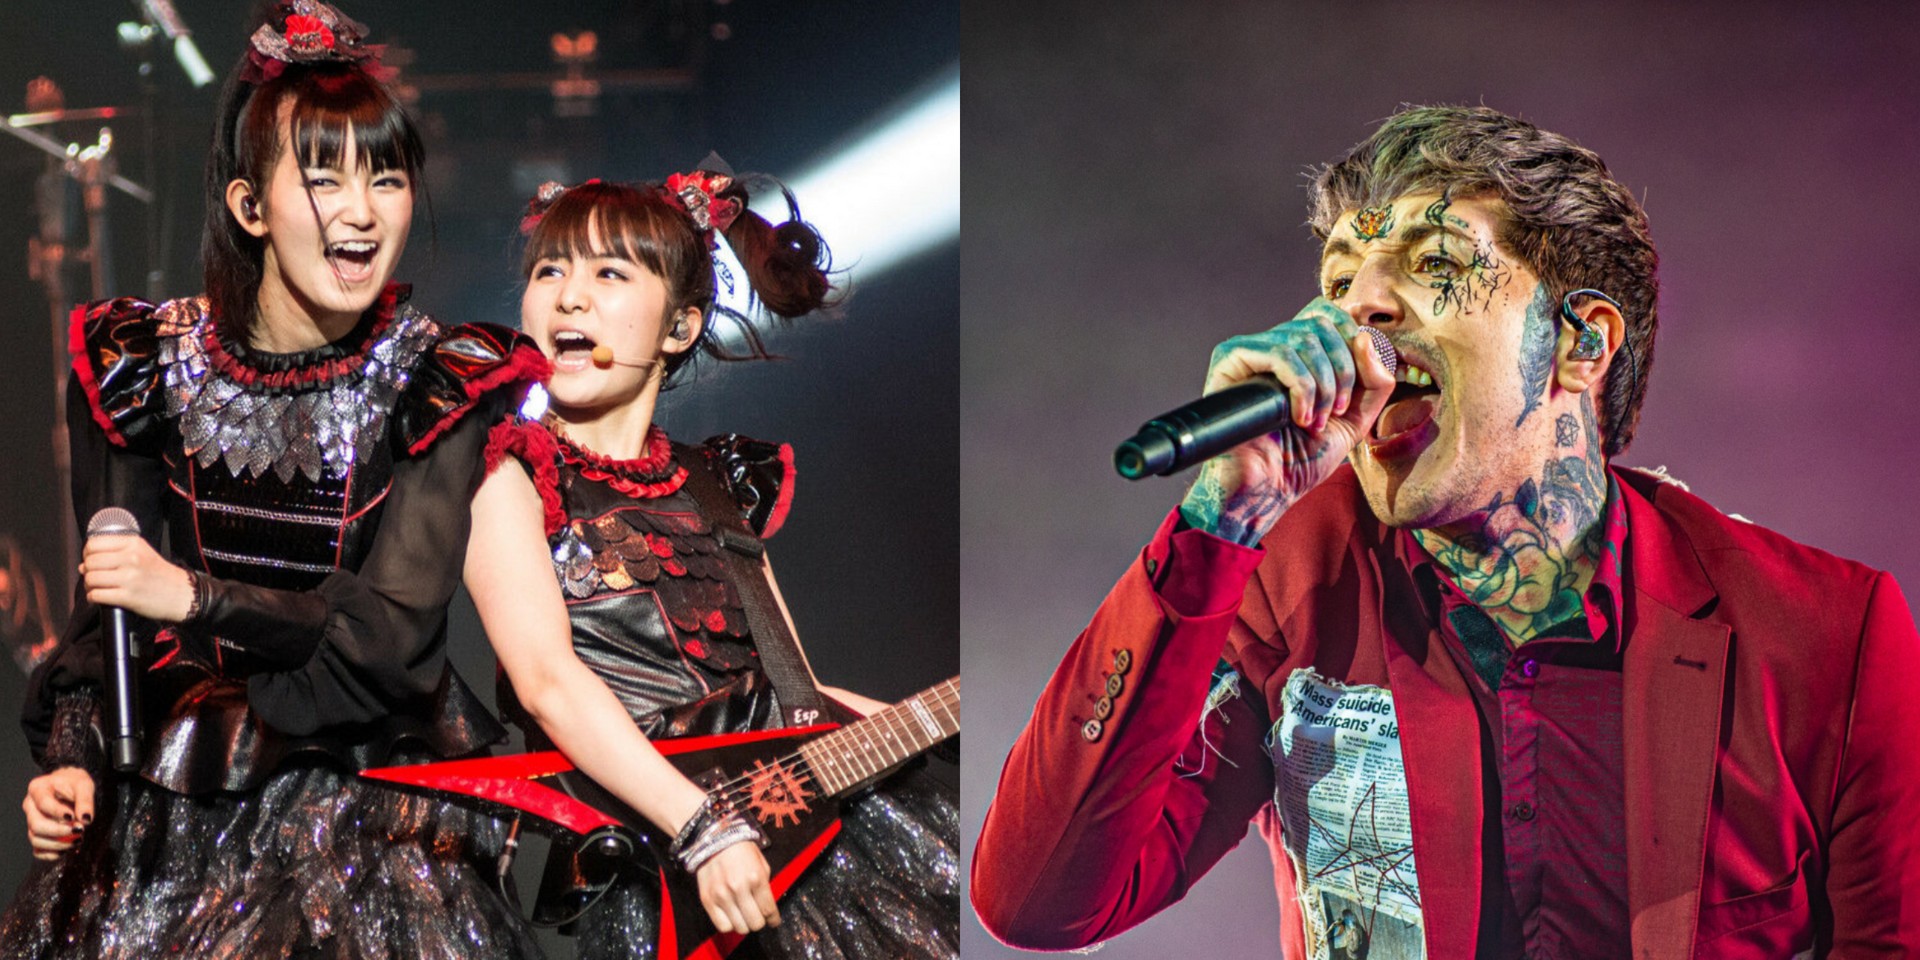 Bring Me The Horizon to support BABYMETAL for the METAL GALAXY WORLD  TOUR IN JAPAN this November